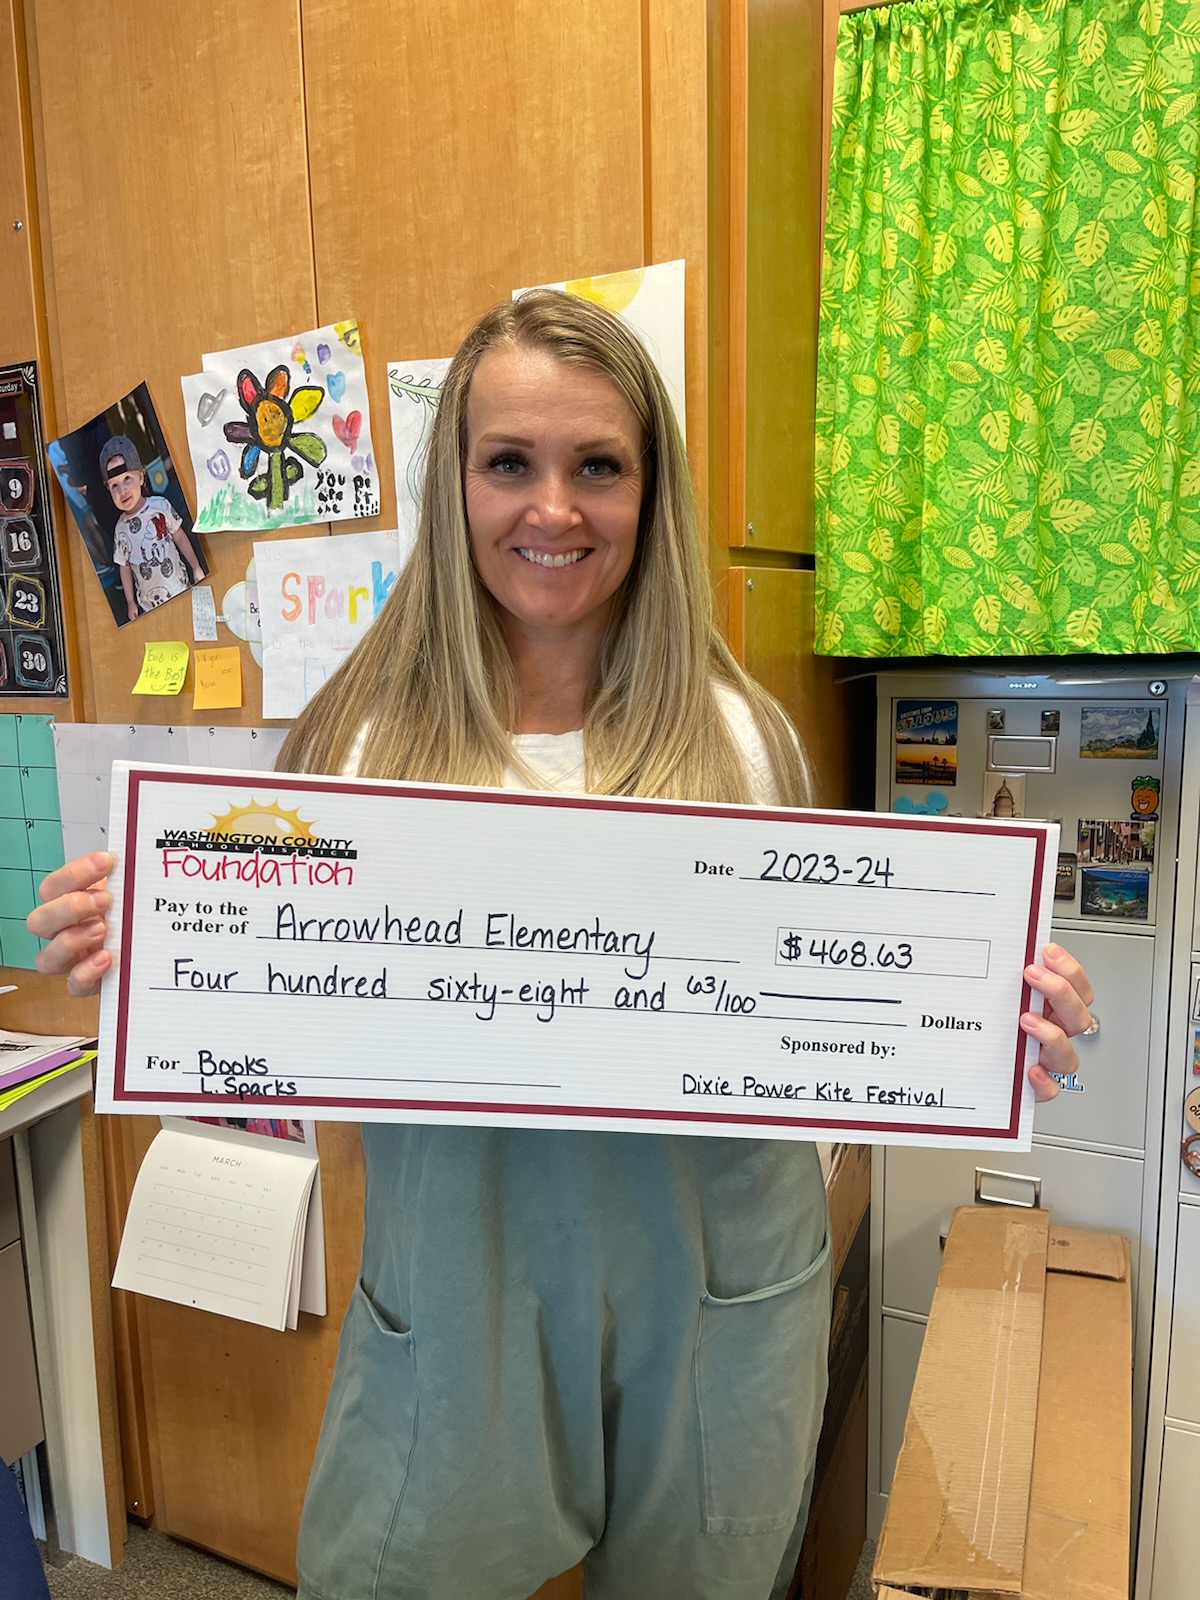 Mrs. Sparks received a Foundation Grant for the 2023-24 school year. Thank you Dixie Power Kite Festival for new books for our classroom.